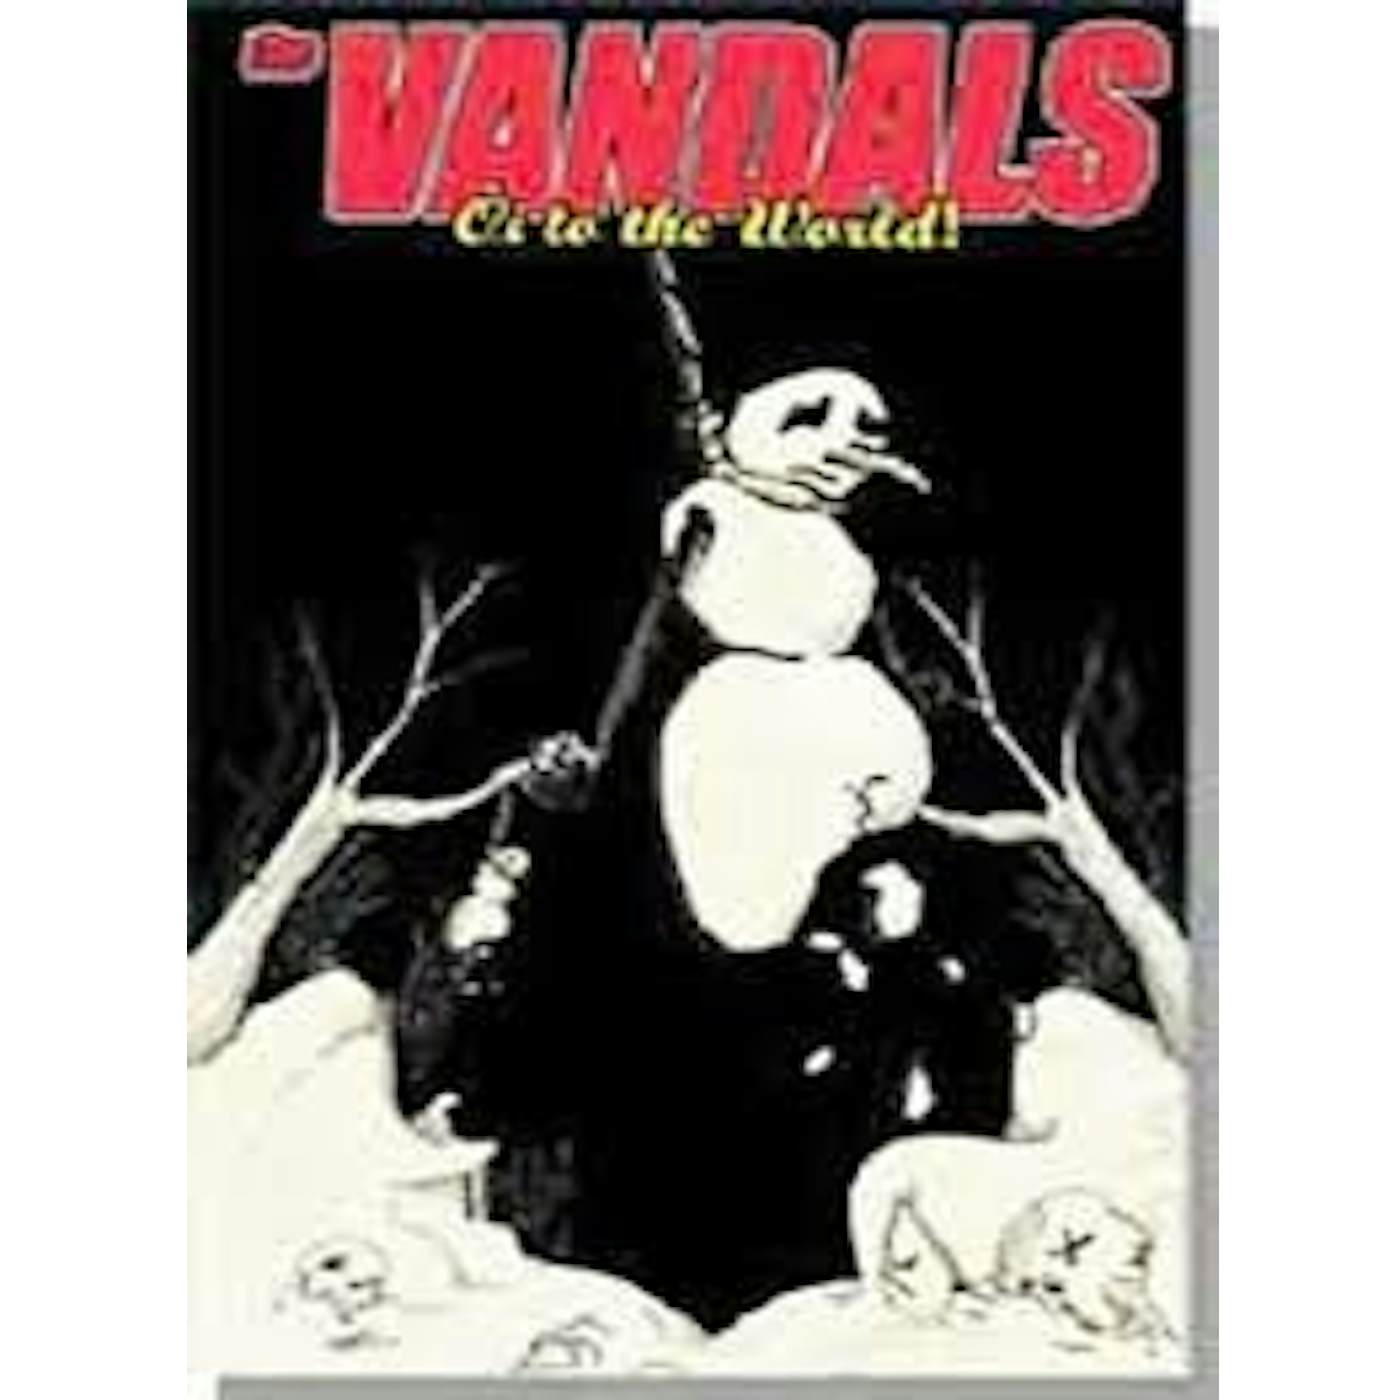 The Vandals  OI TO THE WORLD Vinyl Record